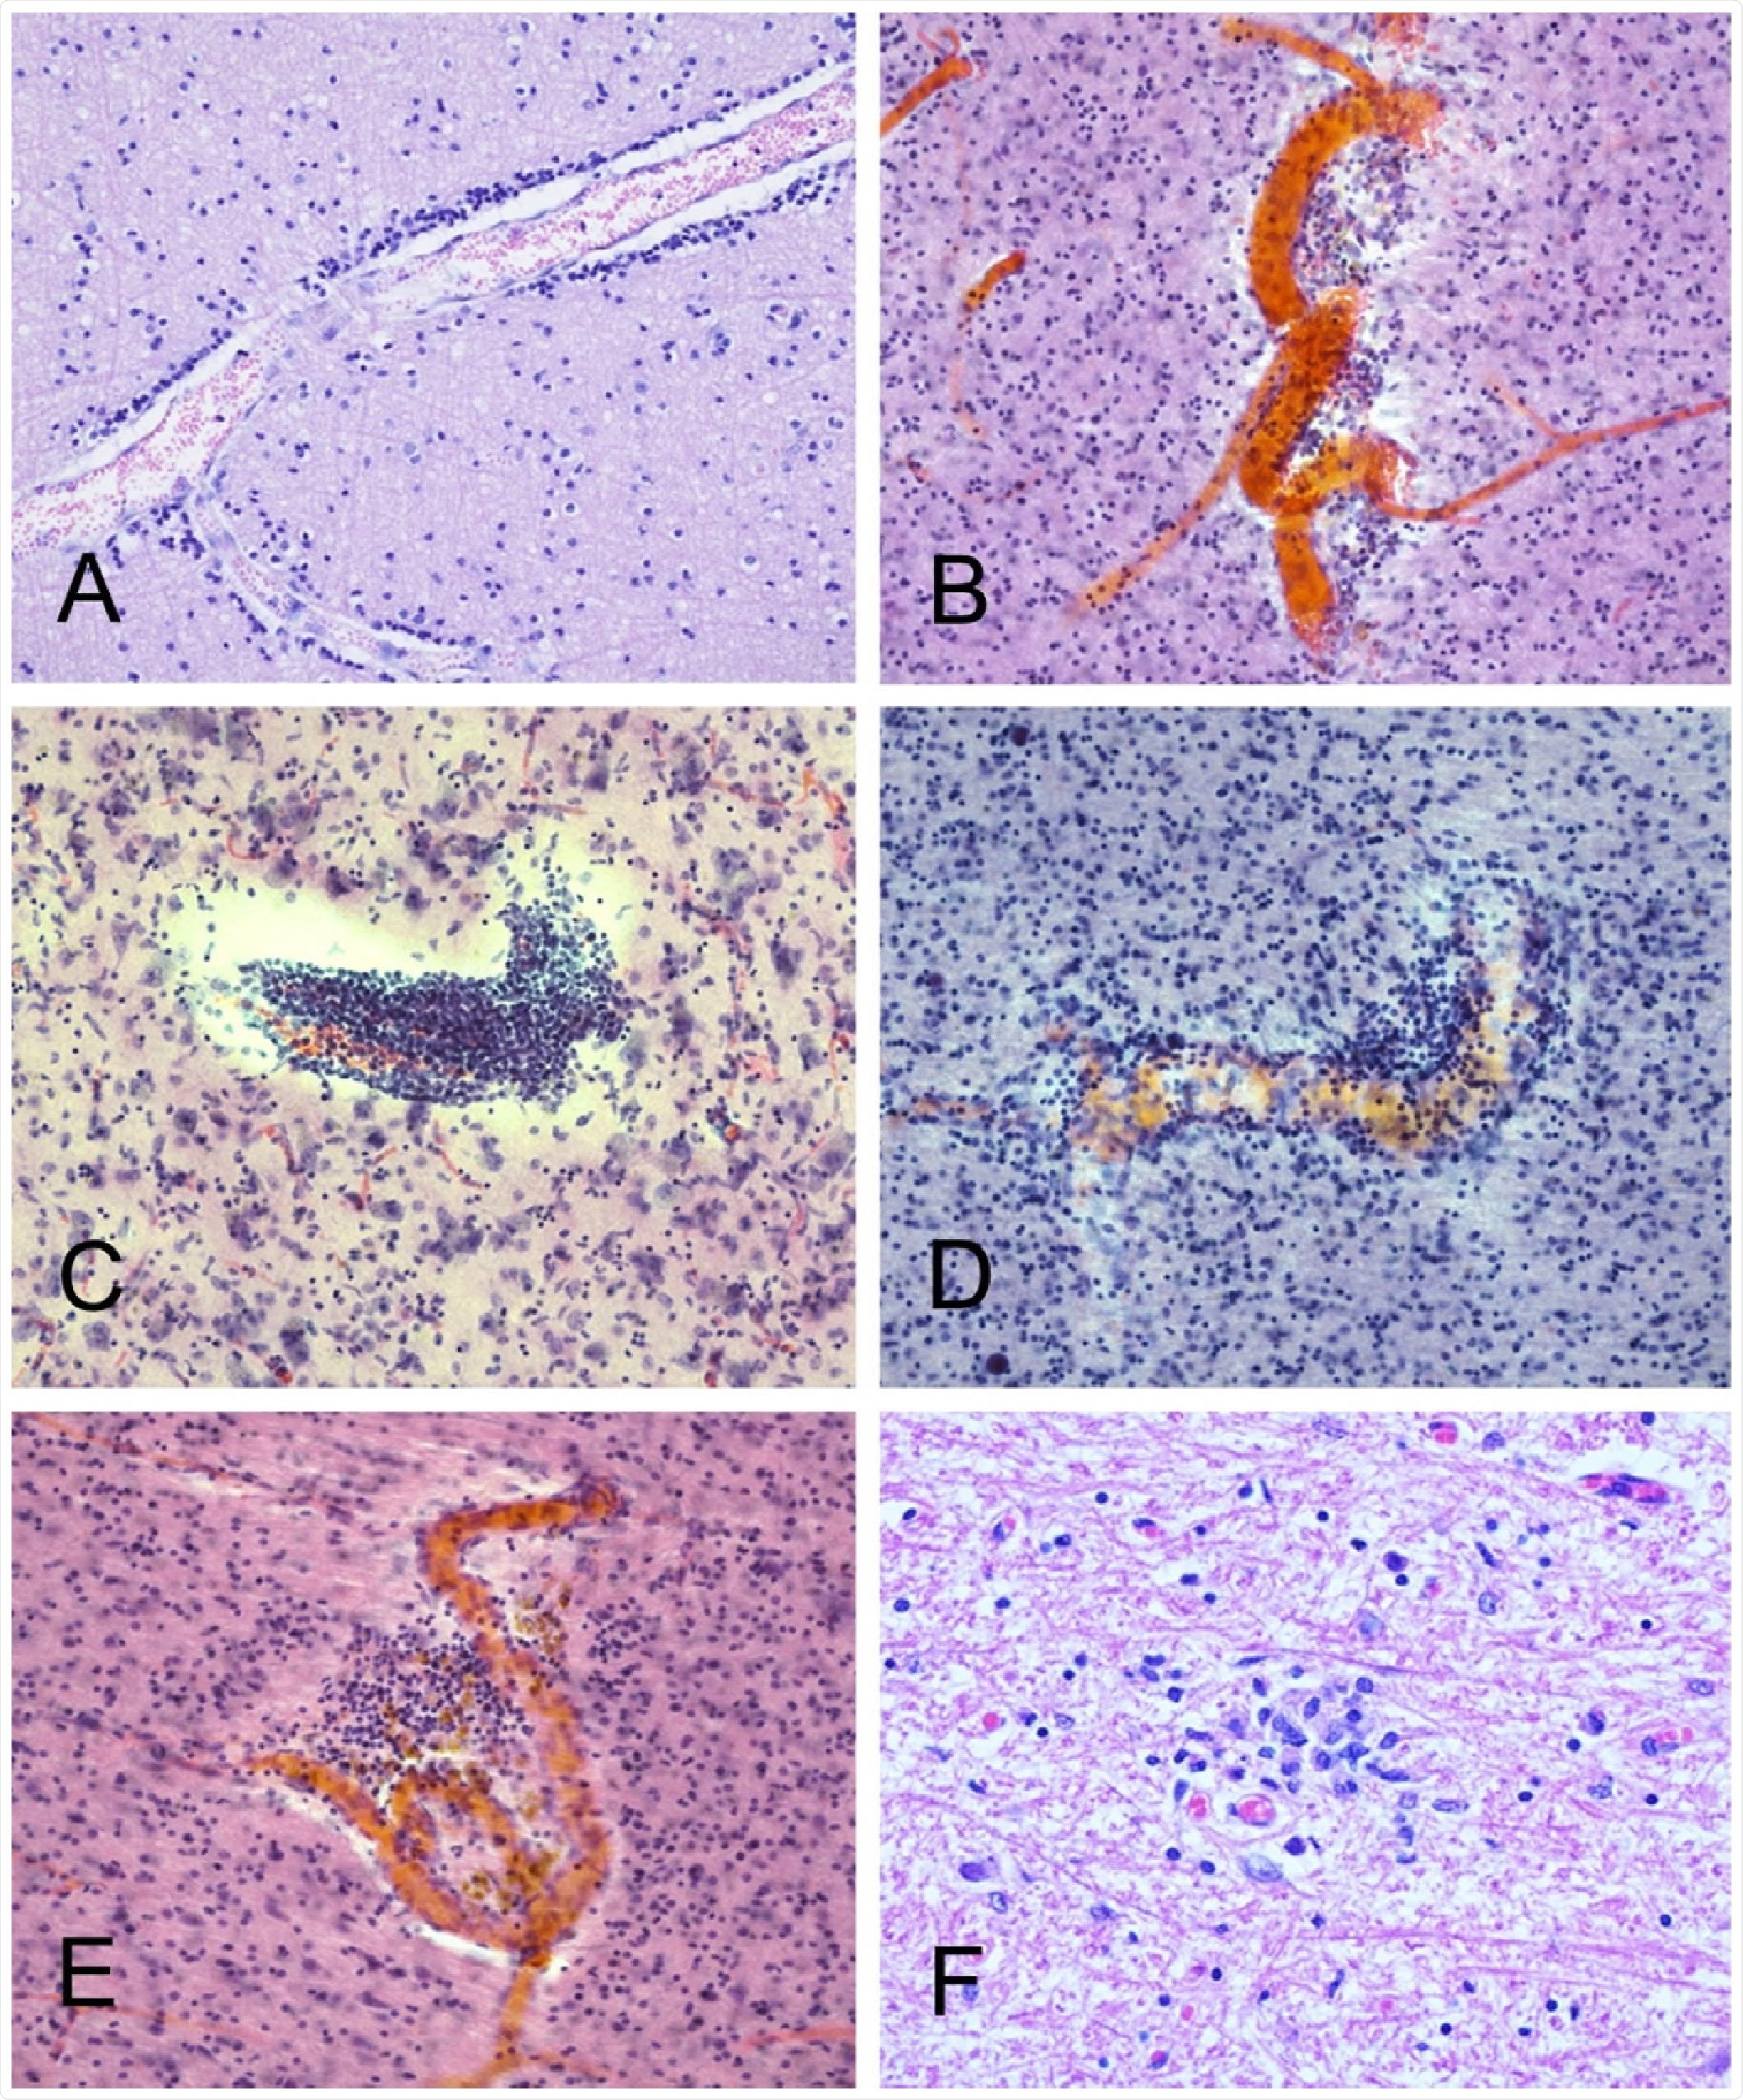 Several cases had occasional perivascular mononuclear cell aggregates, in both gray and wh matter. Shown are examples from BSHRI Case B4, a male in his 80s(A), Case B2, a female in her 70s Case B6, a male in his 70s (C), Case B8, a male in his 80s(D), and Case B9, a male in his 70s (E). Also is a microglial nodule in the posterior medulla in the region of the nucleus gracilis, in BSHRI Case B6 (F) Images are from H & E-stained 80 μm thick sections (B-E) or 6 μm paraffin sections (A, F).